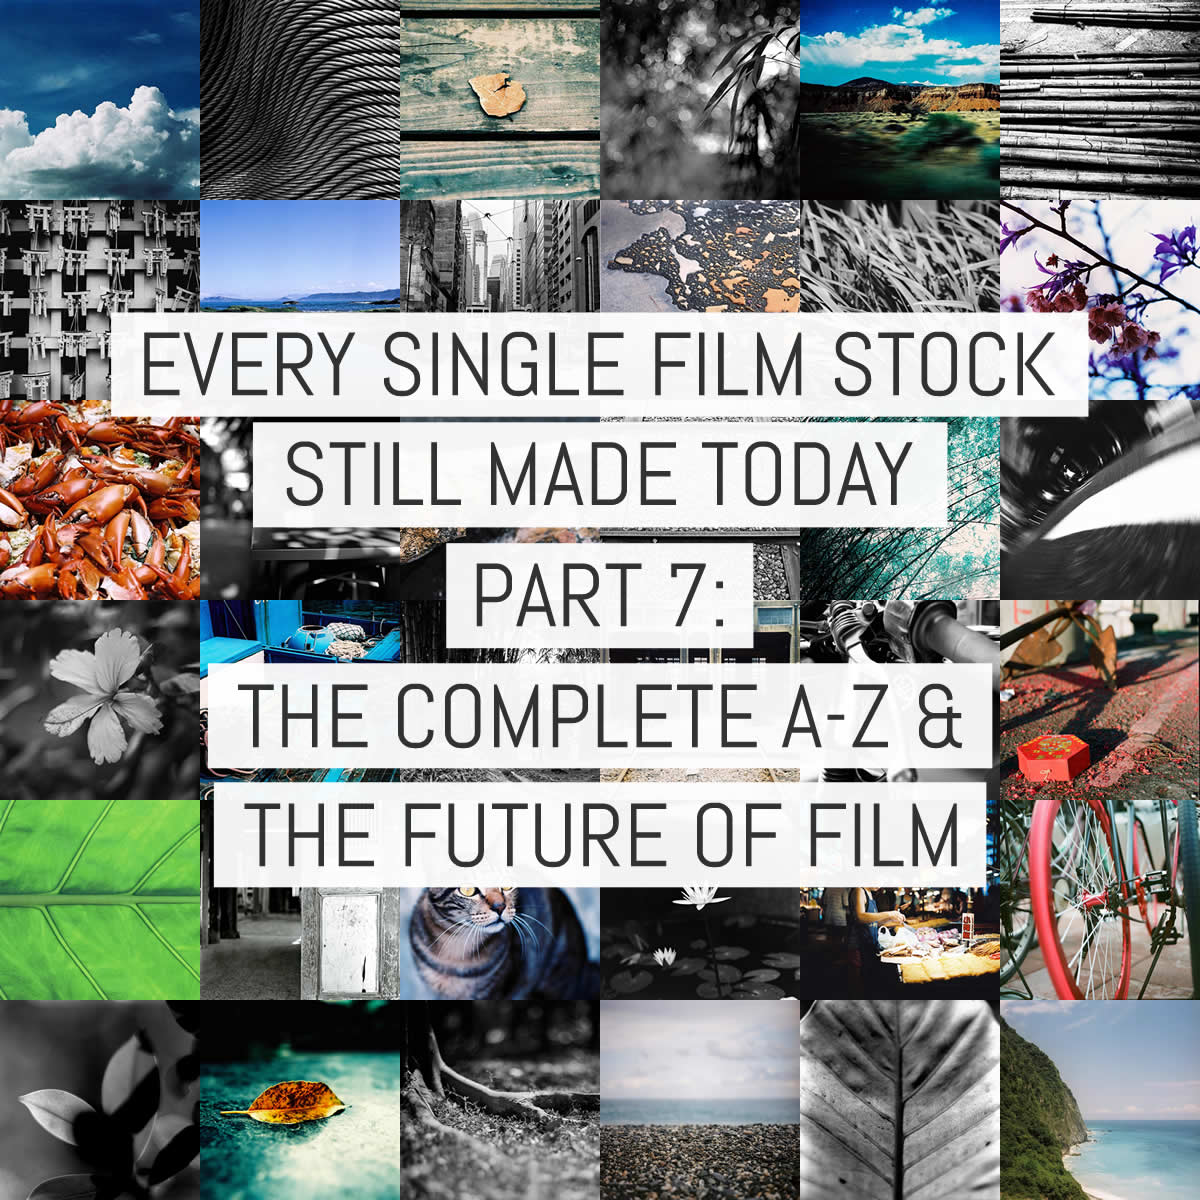 Every single film stock still made today – Part 7: the complete A-Z plus thoughts on the future of film